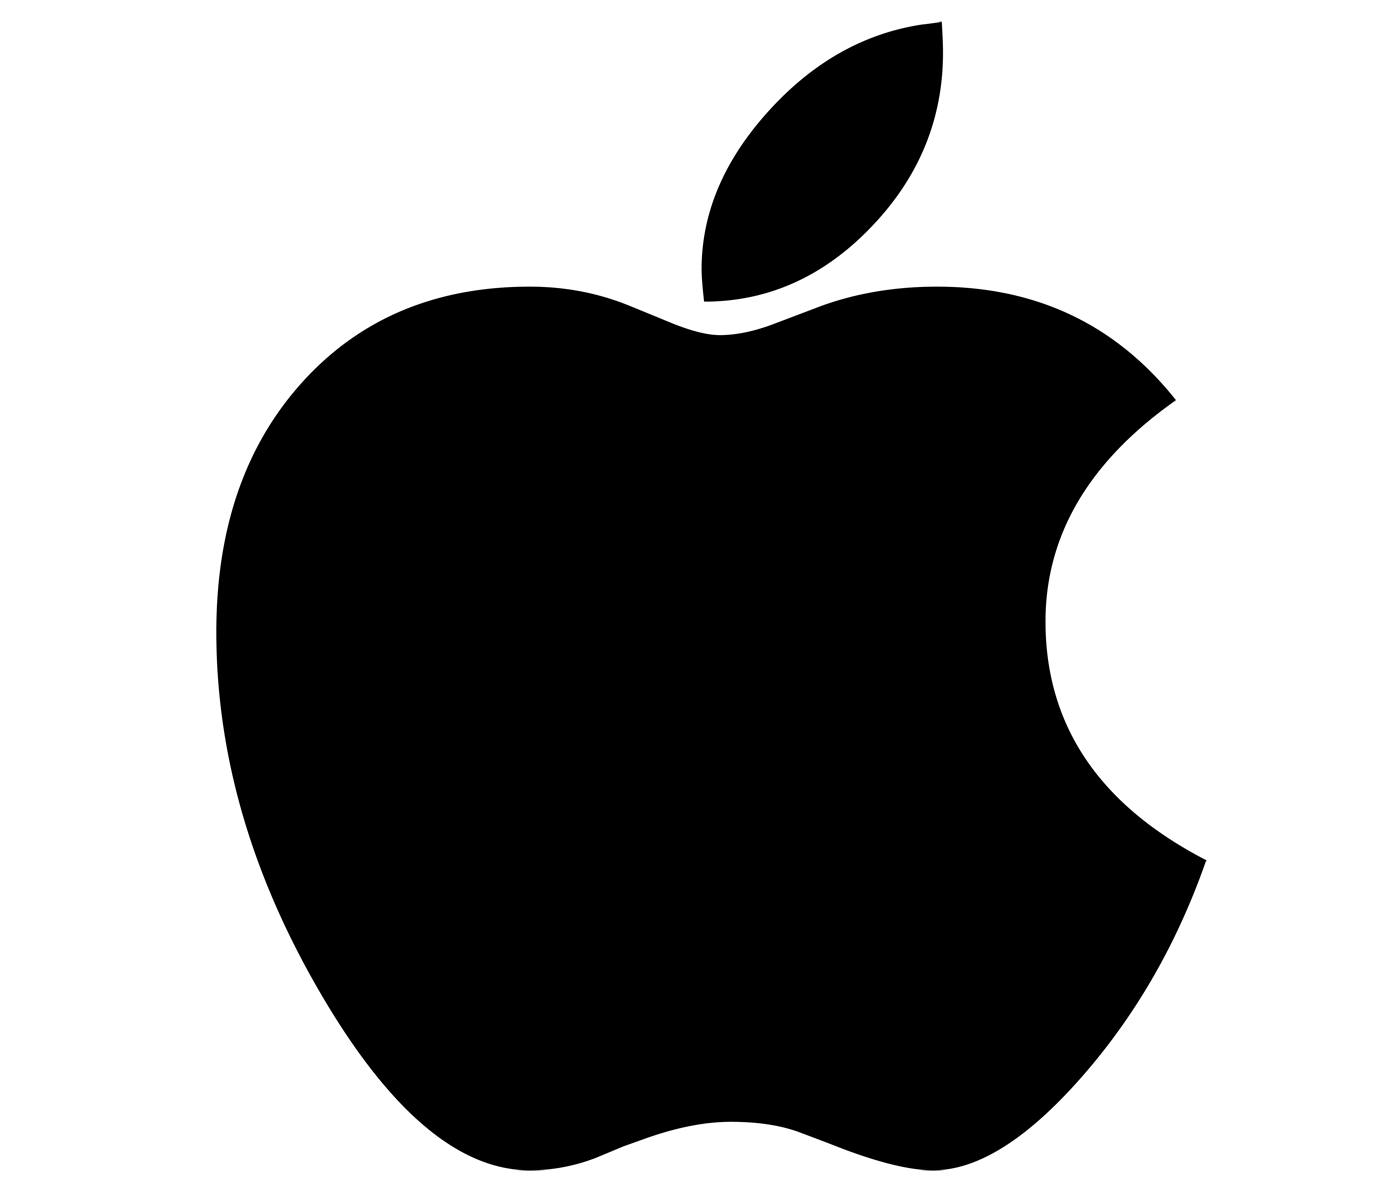 Iphon Logo - iPhone Logo, iPhone Symbol Meaning, History and Evolution